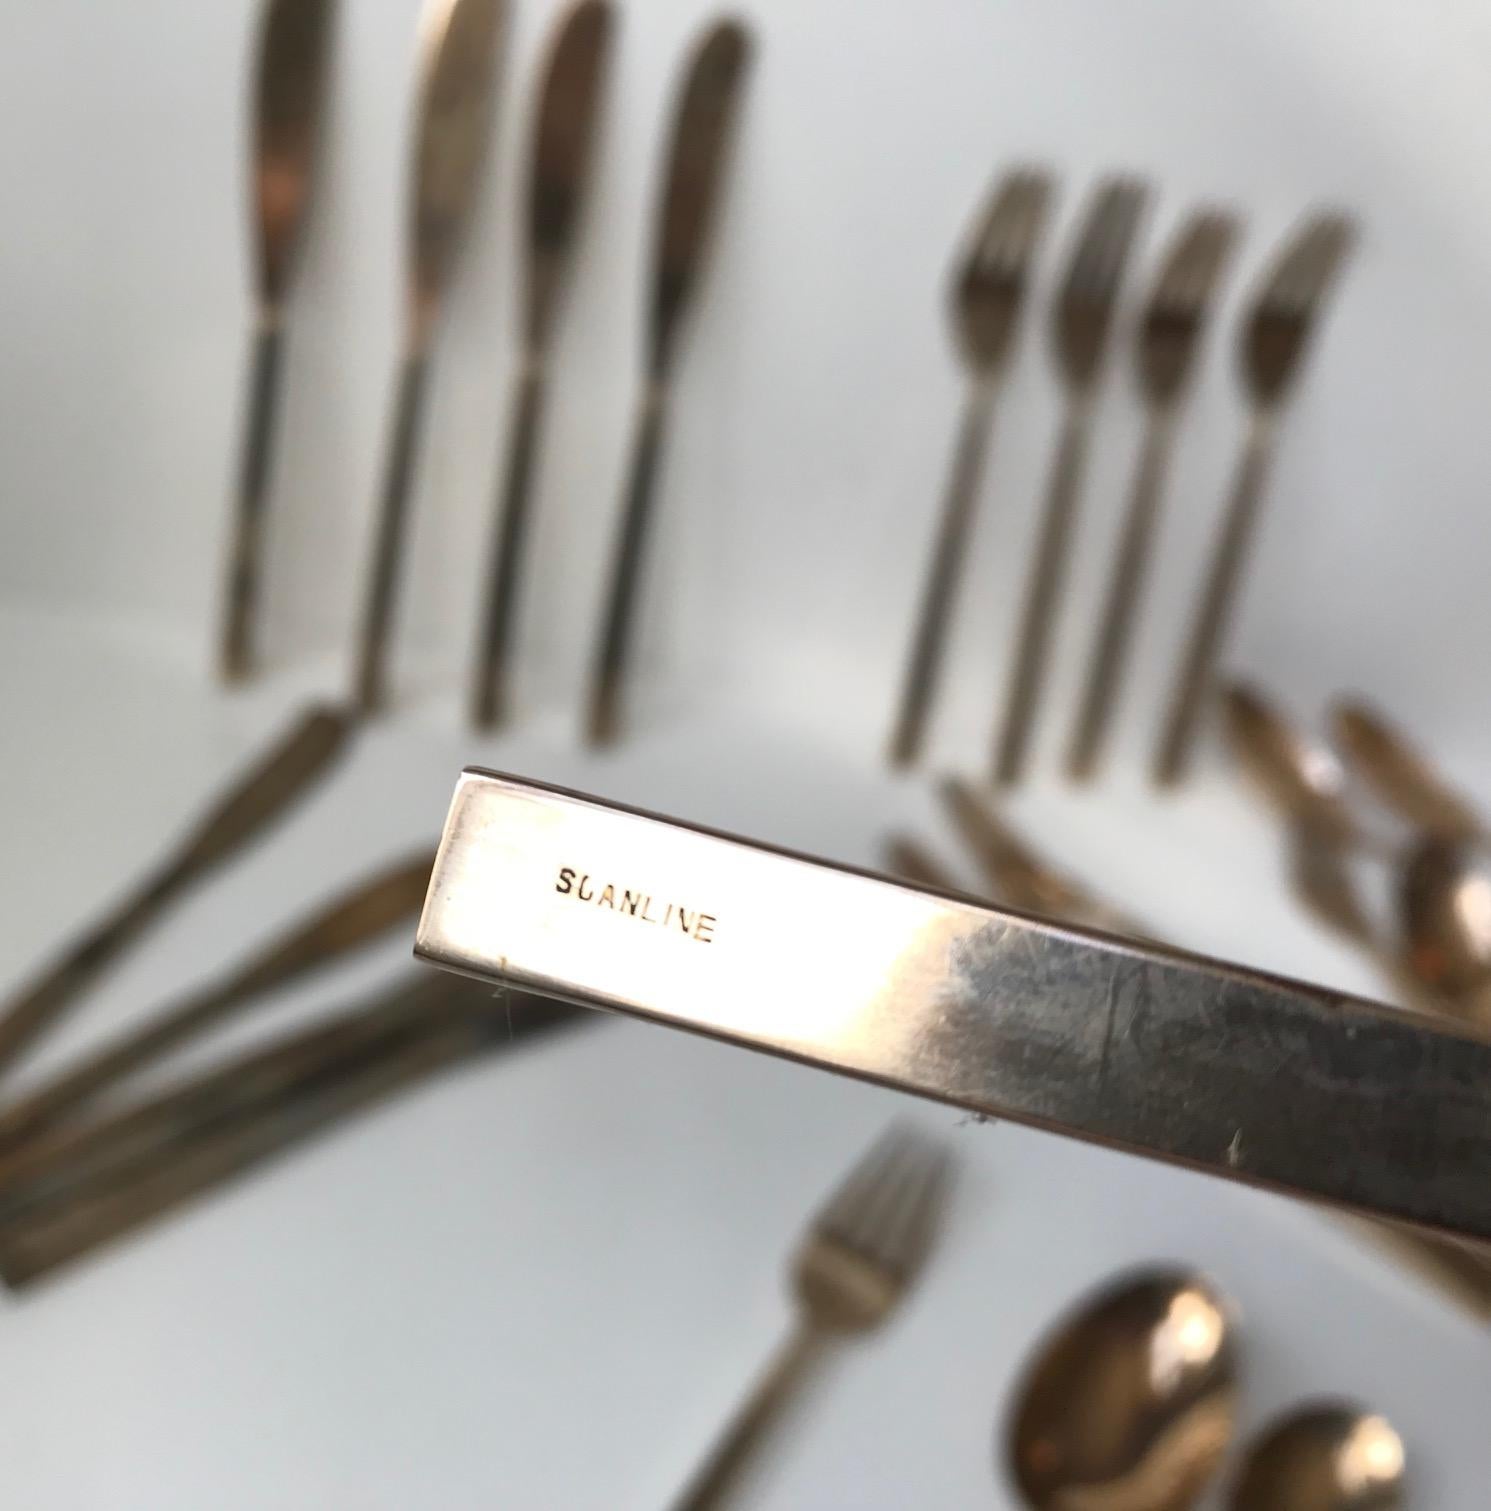 Mid-20th Century Midcentury Bronze Cutlery by Prince Sigvard Bernadotte, Scanline 1950s, 32 Pcs